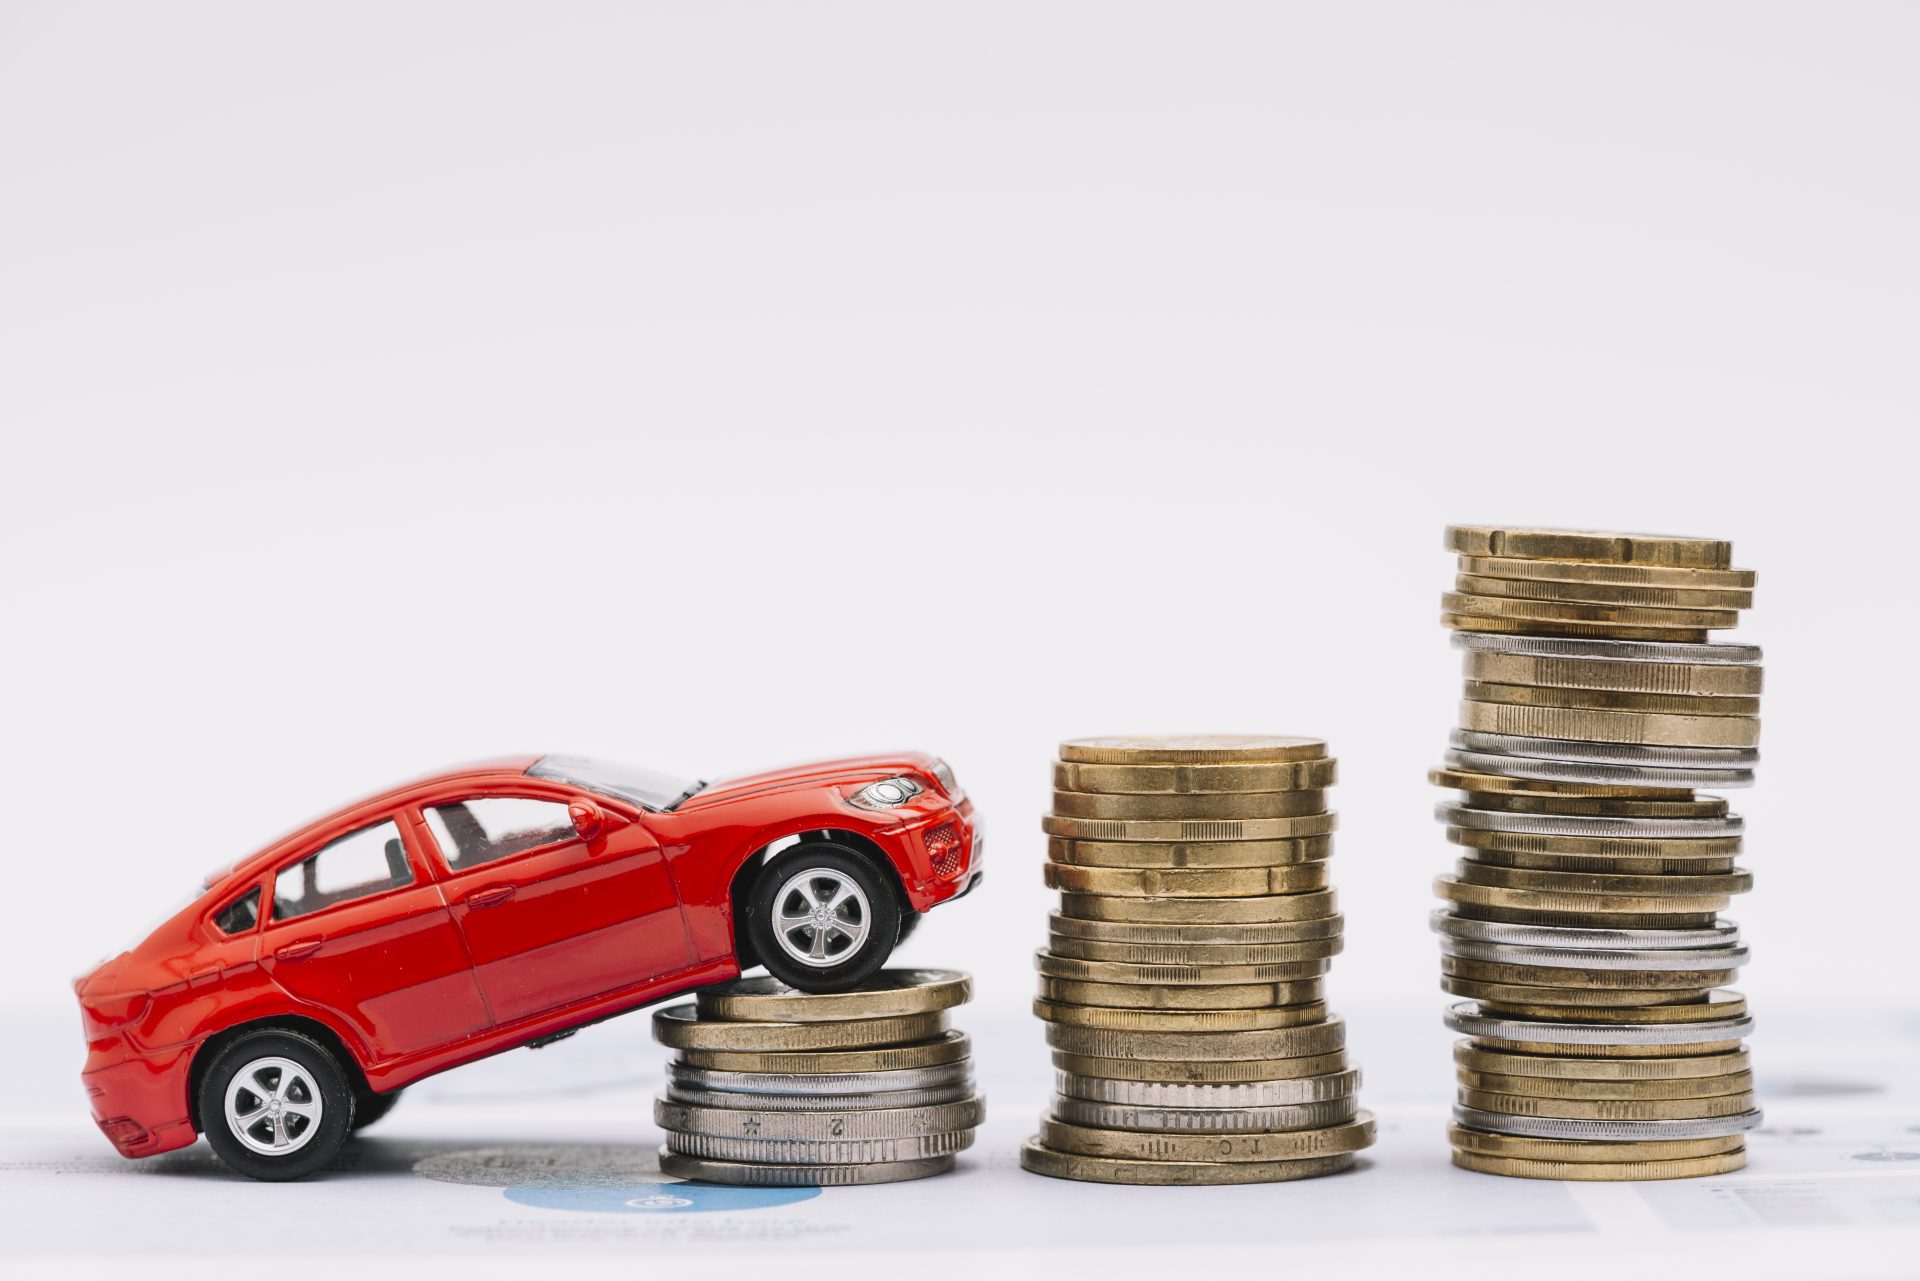 Conceptual image showing a toy car ascending a stack of coins, symbolizing how to save money on car rentals in Dubai